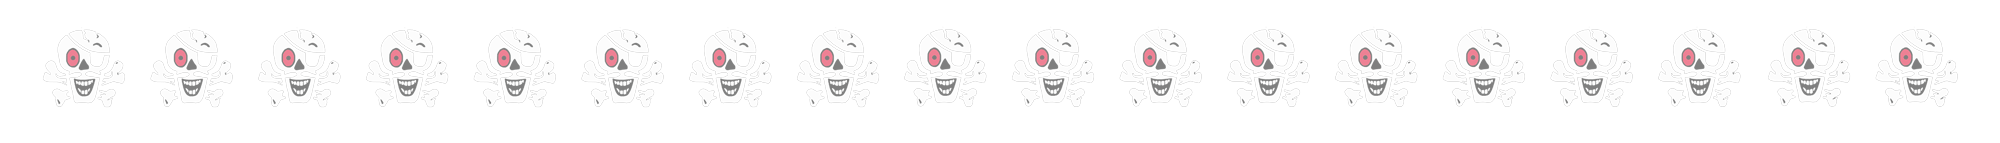 page-skull-banner-5.png